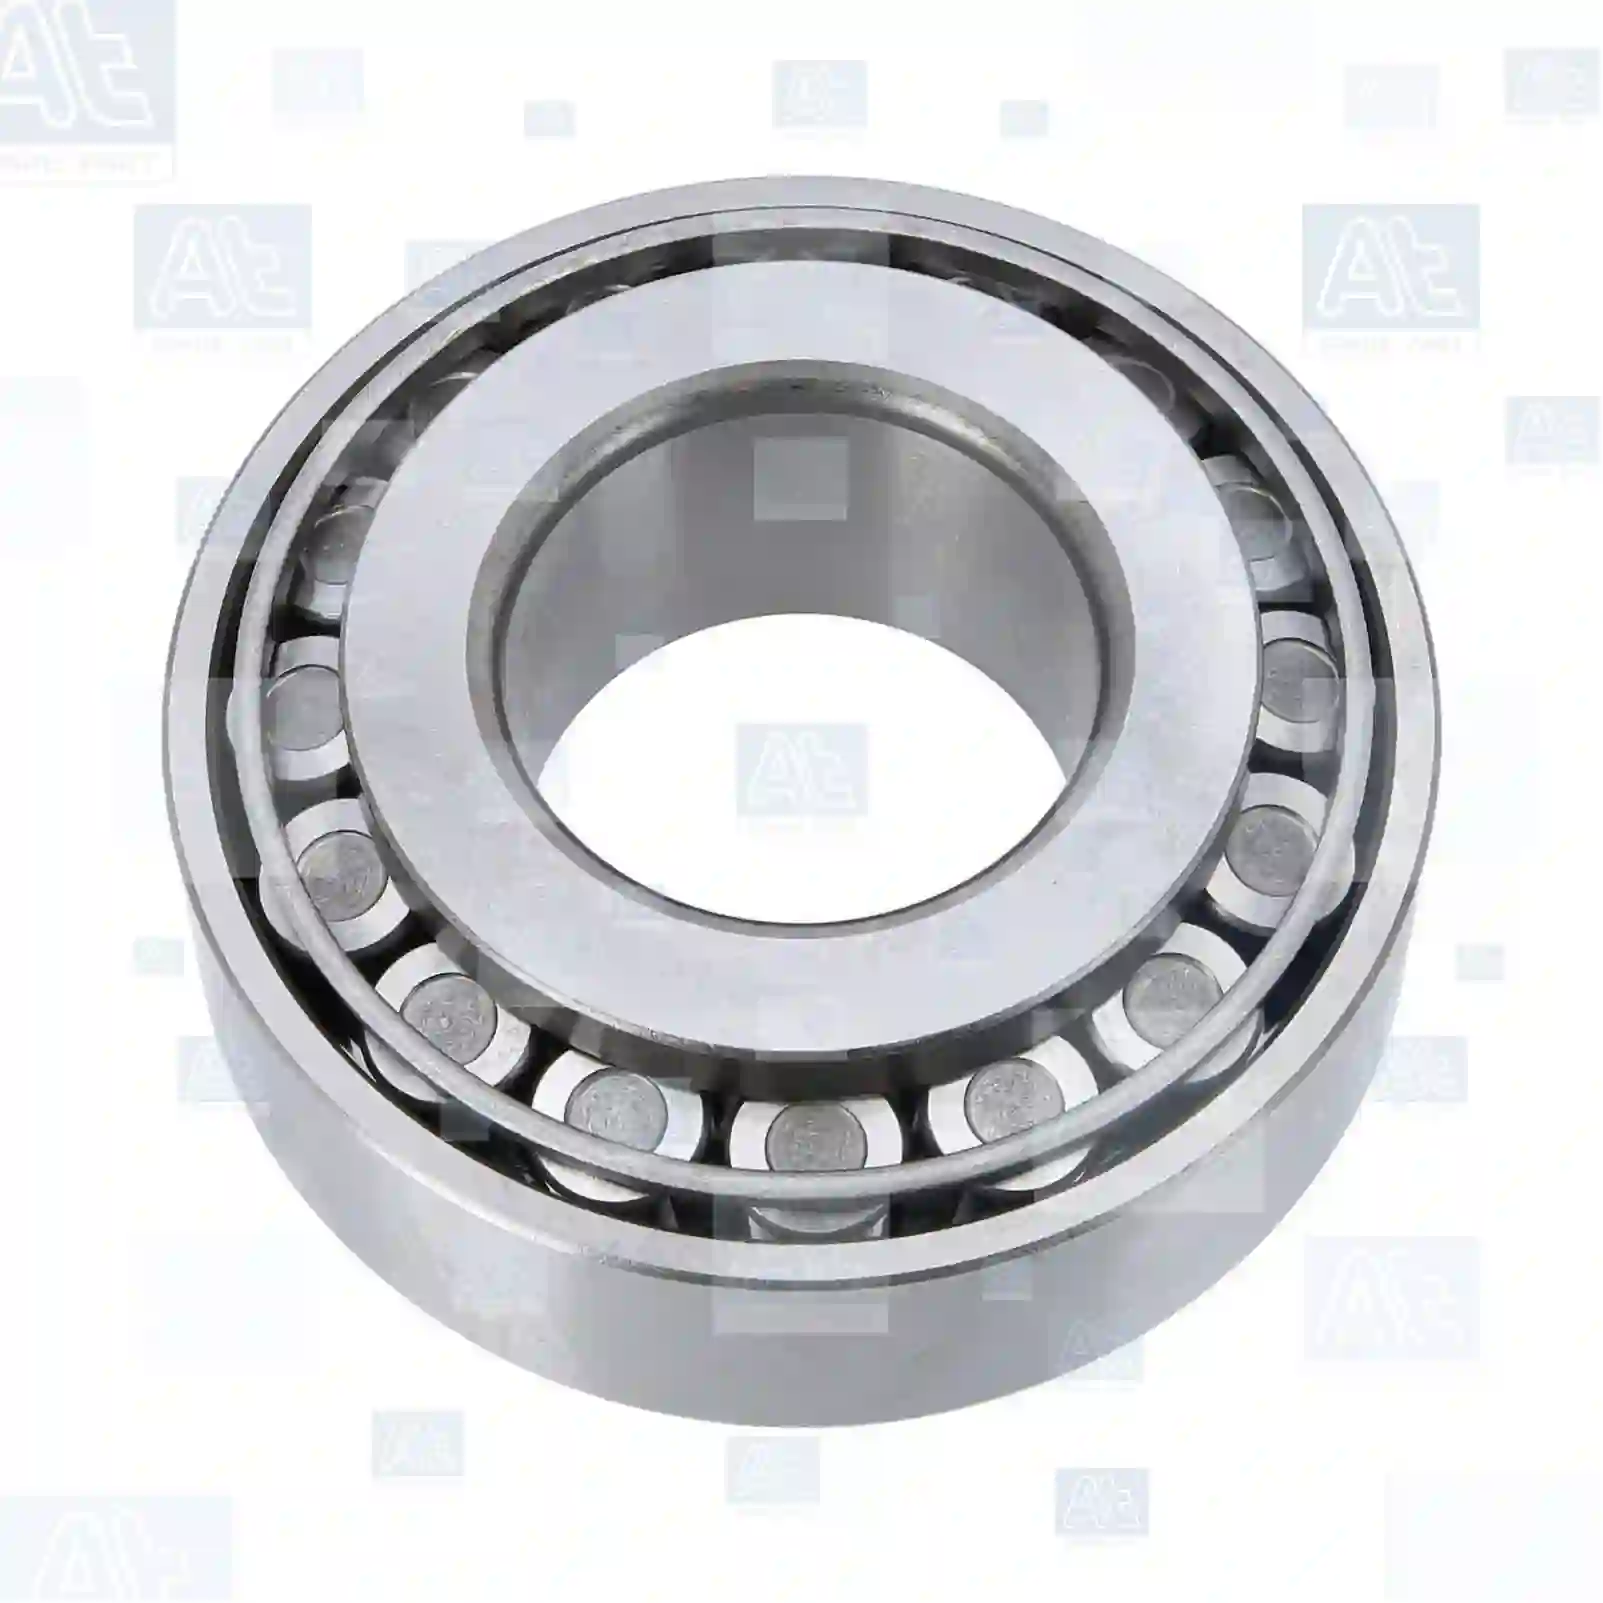 Tapered roller bearing, at no 77725193, oem no: 0275828, 275823, 275828, 01110020, 26800610, 988450103, 988450103A, 988450129, 988450129A, 26800610, 3612965000, 06324990017, 0009812005, 0069810805, 0069816905, 0069817405, 0109819305, 0345386000, 38326-90000, 0023432311, 0959532310, 0959532311, 5000022267, 4200003200, 14764, 178427, 179427, 11095, 183338, ZG02973-0008 At Spare Part | Engine, Accelerator Pedal, Camshaft, Connecting Rod, Crankcase, Crankshaft, Cylinder Head, Engine Suspension Mountings, Exhaust Manifold, Exhaust Gas Recirculation, Filter Kits, Flywheel Housing, General Overhaul Kits, Engine, Intake Manifold, Oil Cleaner, Oil Cooler, Oil Filter, Oil Pump, Oil Sump, Piston & Liner, Sensor & Switch, Timing Case, Turbocharger, Cooling System, Belt Tensioner, Coolant Filter, Coolant Pipe, Corrosion Prevention Agent, Drive, Expansion Tank, Fan, Intercooler, Monitors & Gauges, Radiator, Thermostat, V-Belt / Timing belt, Water Pump, Fuel System, Electronical Injector Unit, Feed Pump, Fuel Filter, cpl., Fuel Gauge Sender,  Fuel Line, Fuel Pump, Fuel Tank, Injection Line Kit, Injection Pump, Exhaust System, Clutch & Pedal, Gearbox, Propeller Shaft, Axles, Brake System, Hubs & Wheels, Suspension, Leaf Spring, Universal Parts / Accessories, Steering, Electrical System, Cabin Tapered roller bearing, at no 77725193, oem no: 0275828, 275823, 275828, 01110020, 26800610, 988450103, 988450103A, 988450129, 988450129A, 26800610, 3612965000, 06324990017, 0009812005, 0069810805, 0069816905, 0069817405, 0109819305, 0345386000, 38326-90000, 0023432311, 0959532310, 0959532311, 5000022267, 4200003200, 14764, 178427, 179427, 11095, 183338, ZG02973-0008 At Spare Part | Engine, Accelerator Pedal, Camshaft, Connecting Rod, Crankcase, Crankshaft, Cylinder Head, Engine Suspension Mountings, Exhaust Manifold, Exhaust Gas Recirculation, Filter Kits, Flywheel Housing, General Overhaul Kits, Engine, Intake Manifold, Oil Cleaner, Oil Cooler, Oil Filter, Oil Pump, Oil Sump, Piston & Liner, Sensor & Switch, Timing Case, Turbocharger, Cooling System, Belt Tensioner, Coolant Filter, Coolant Pipe, Corrosion Prevention Agent, Drive, Expansion Tank, Fan, Intercooler, Monitors & Gauges, Radiator, Thermostat, V-Belt / Timing belt, Water Pump, Fuel System, Electronical Injector Unit, Feed Pump, Fuel Filter, cpl., Fuel Gauge Sender,  Fuel Line, Fuel Pump, Fuel Tank, Injection Line Kit, Injection Pump, Exhaust System, Clutch & Pedal, Gearbox, Propeller Shaft, Axles, Brake System, Hubs & Wheels, Suspension, Leaf Spring, Universal Parts / Accessories, Steering, Electrical System, Cabin